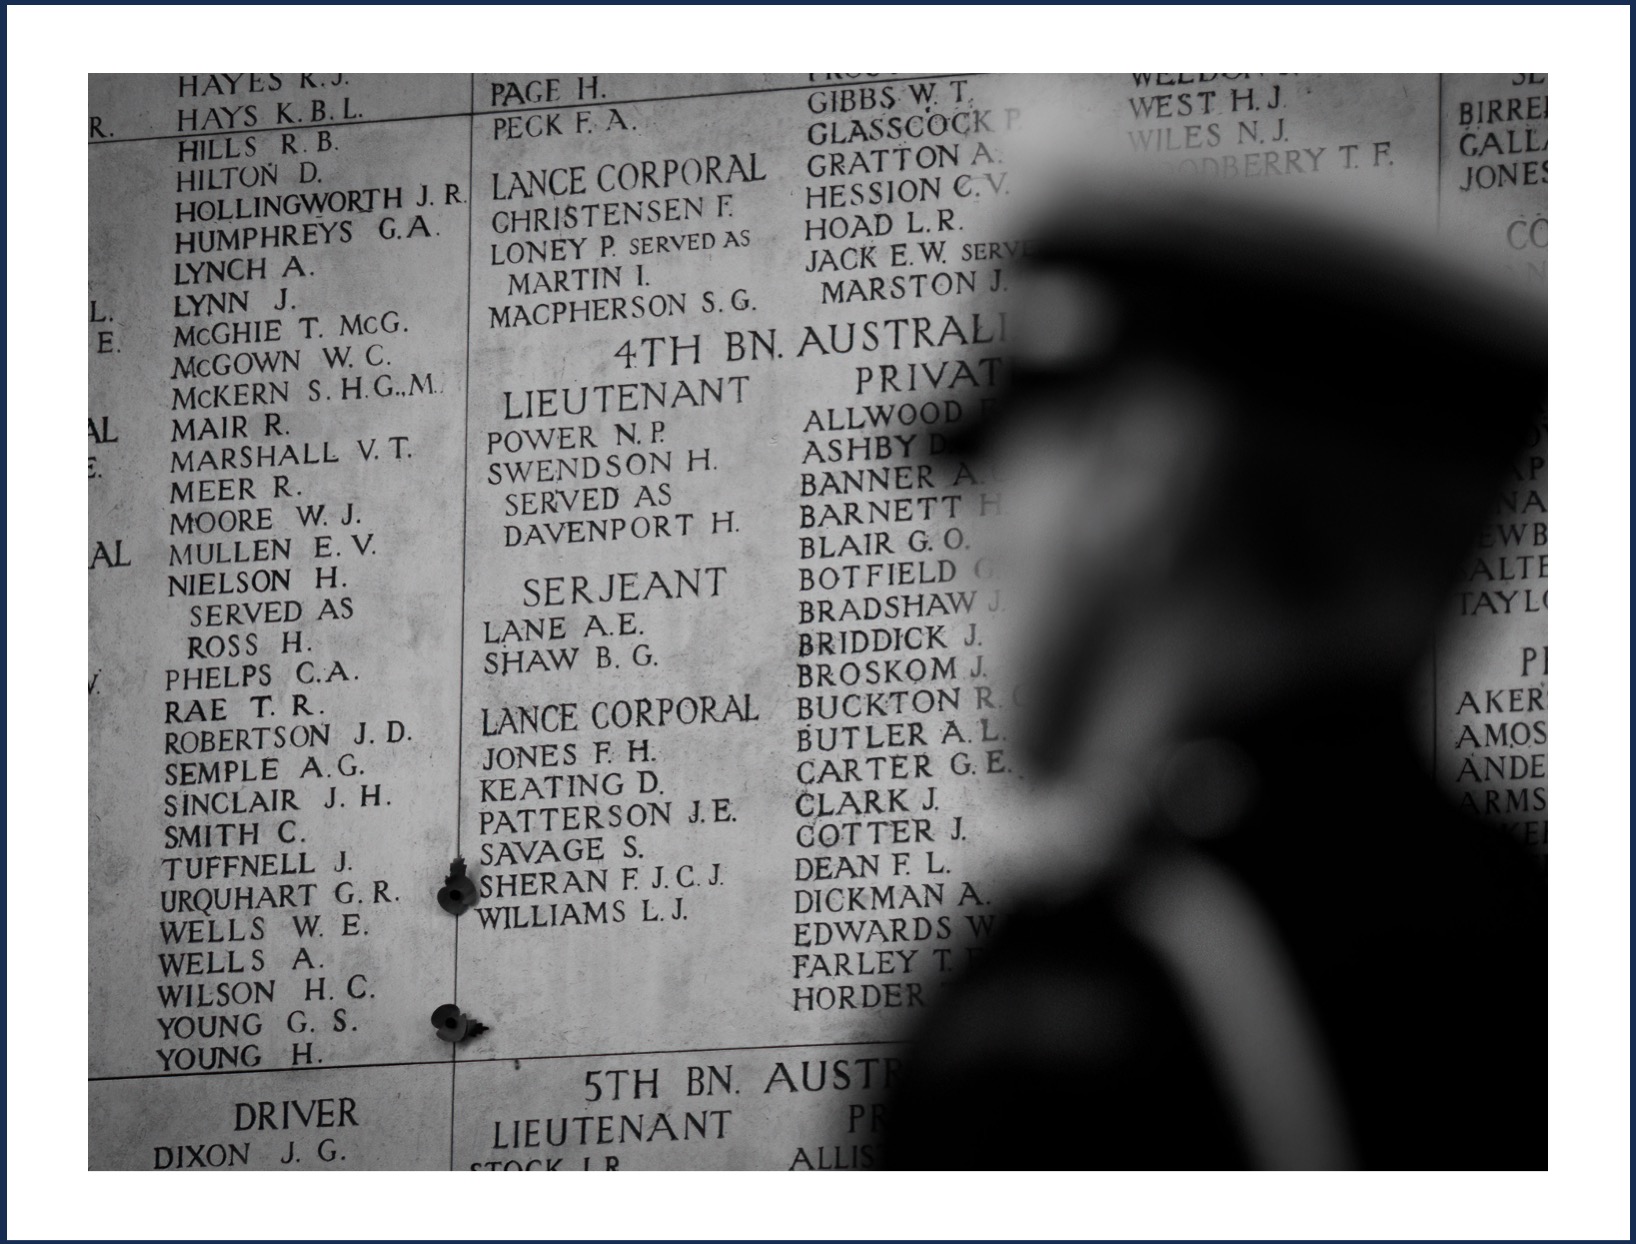 Ceremony of Remembrance at the Menin Gate 